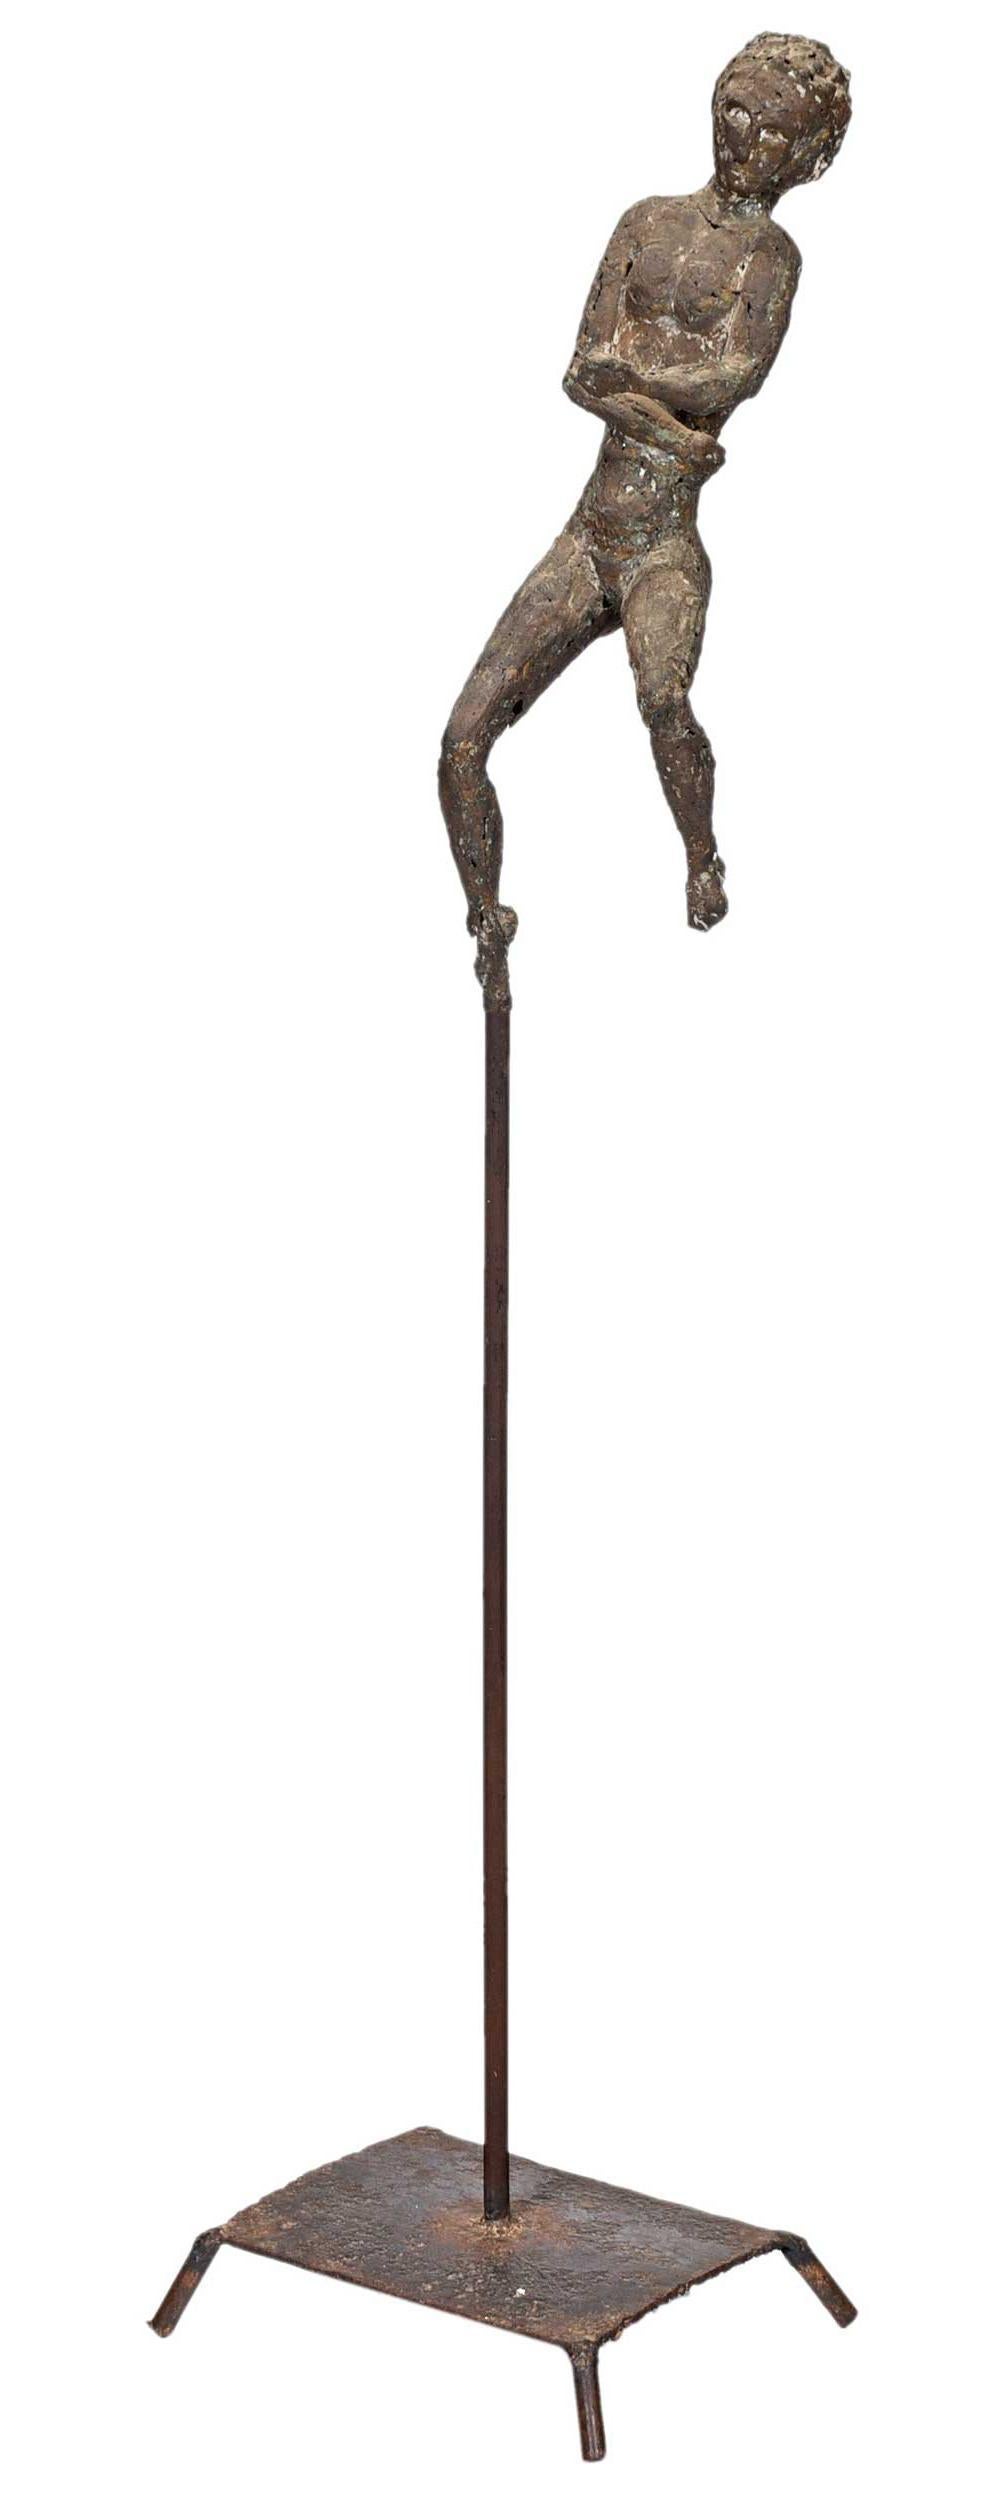 David Hare
Dancer, circa 1955
Bronze with integral stand
68 high x 17 wide x 13 1/2 deep inches


“Freedom is what we want,” David Hare boldly stated in 1965, but then he added the caveat, “and what we are most afraid of.” No one could accuse David